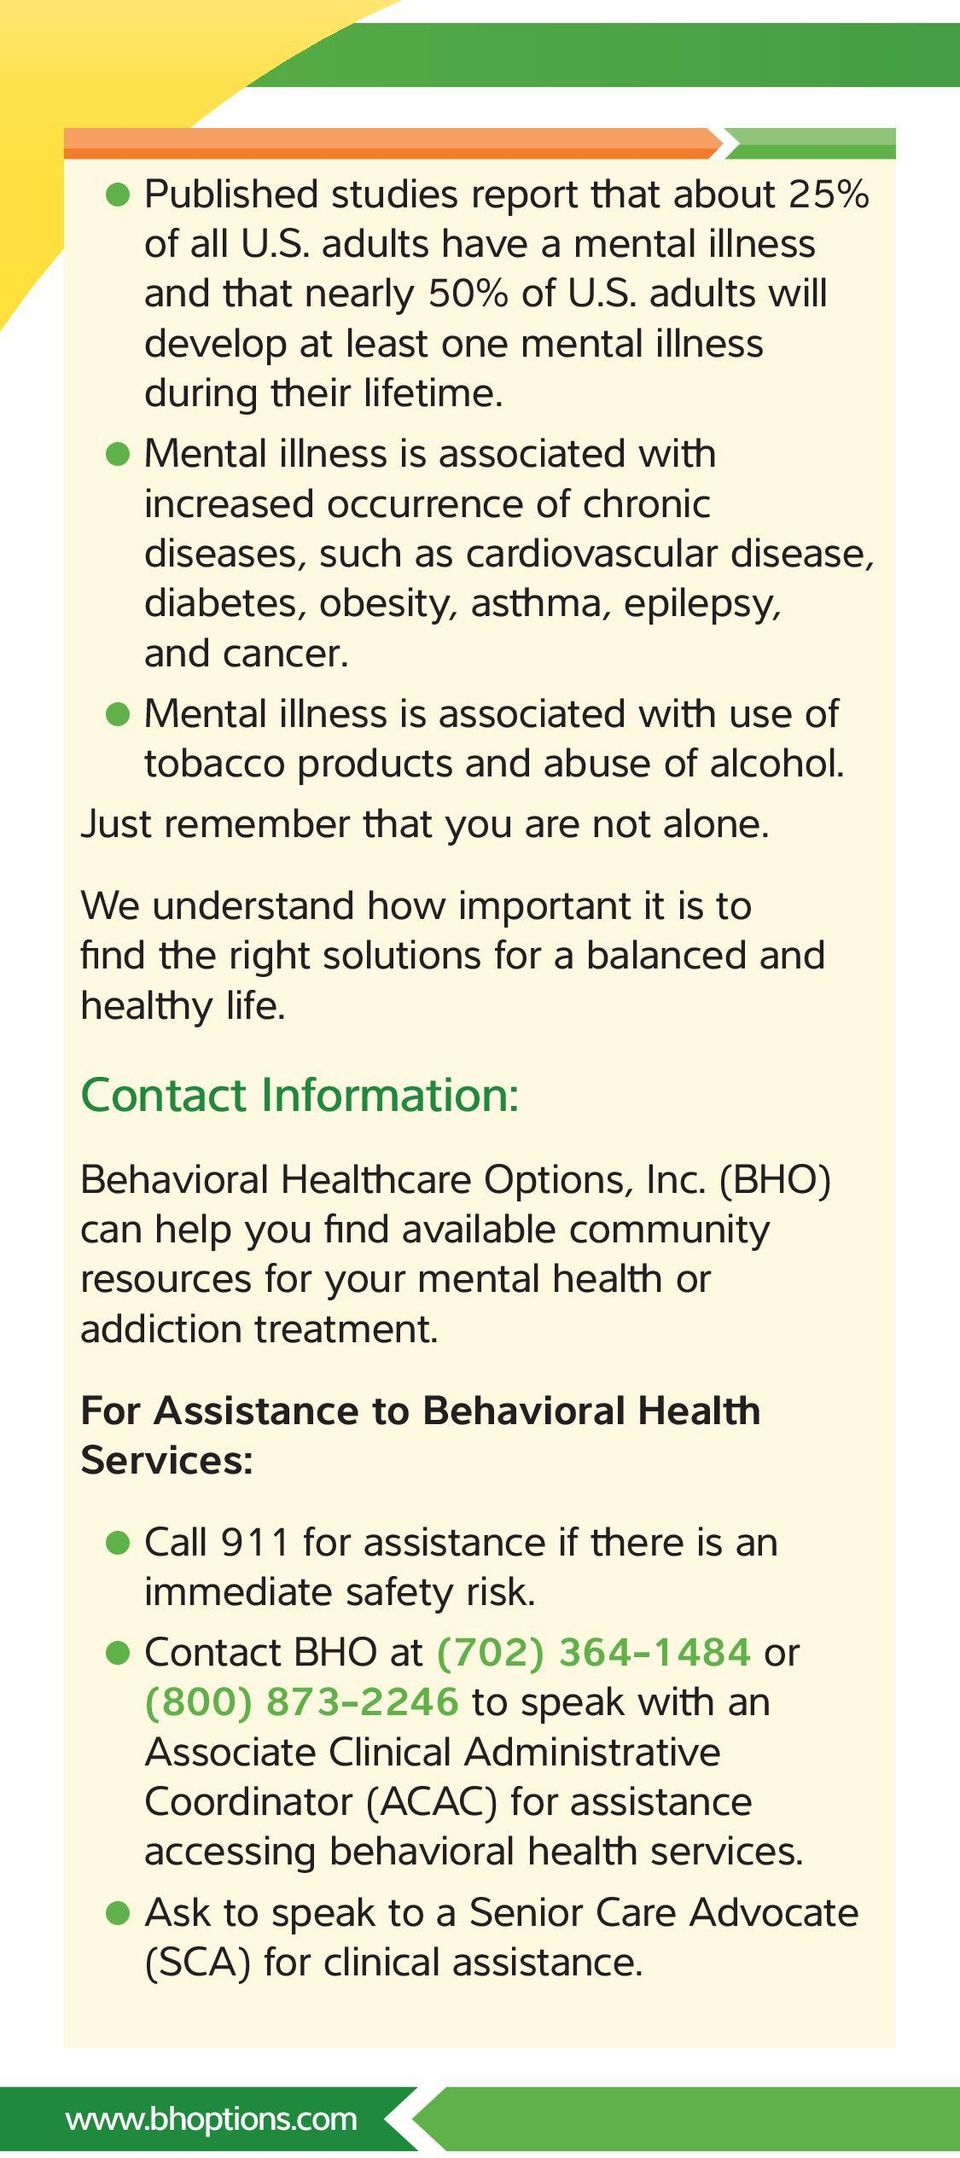 Mental illness is associated with use of tobacco products and abuse of alcohol. Just remember that you are not alone.